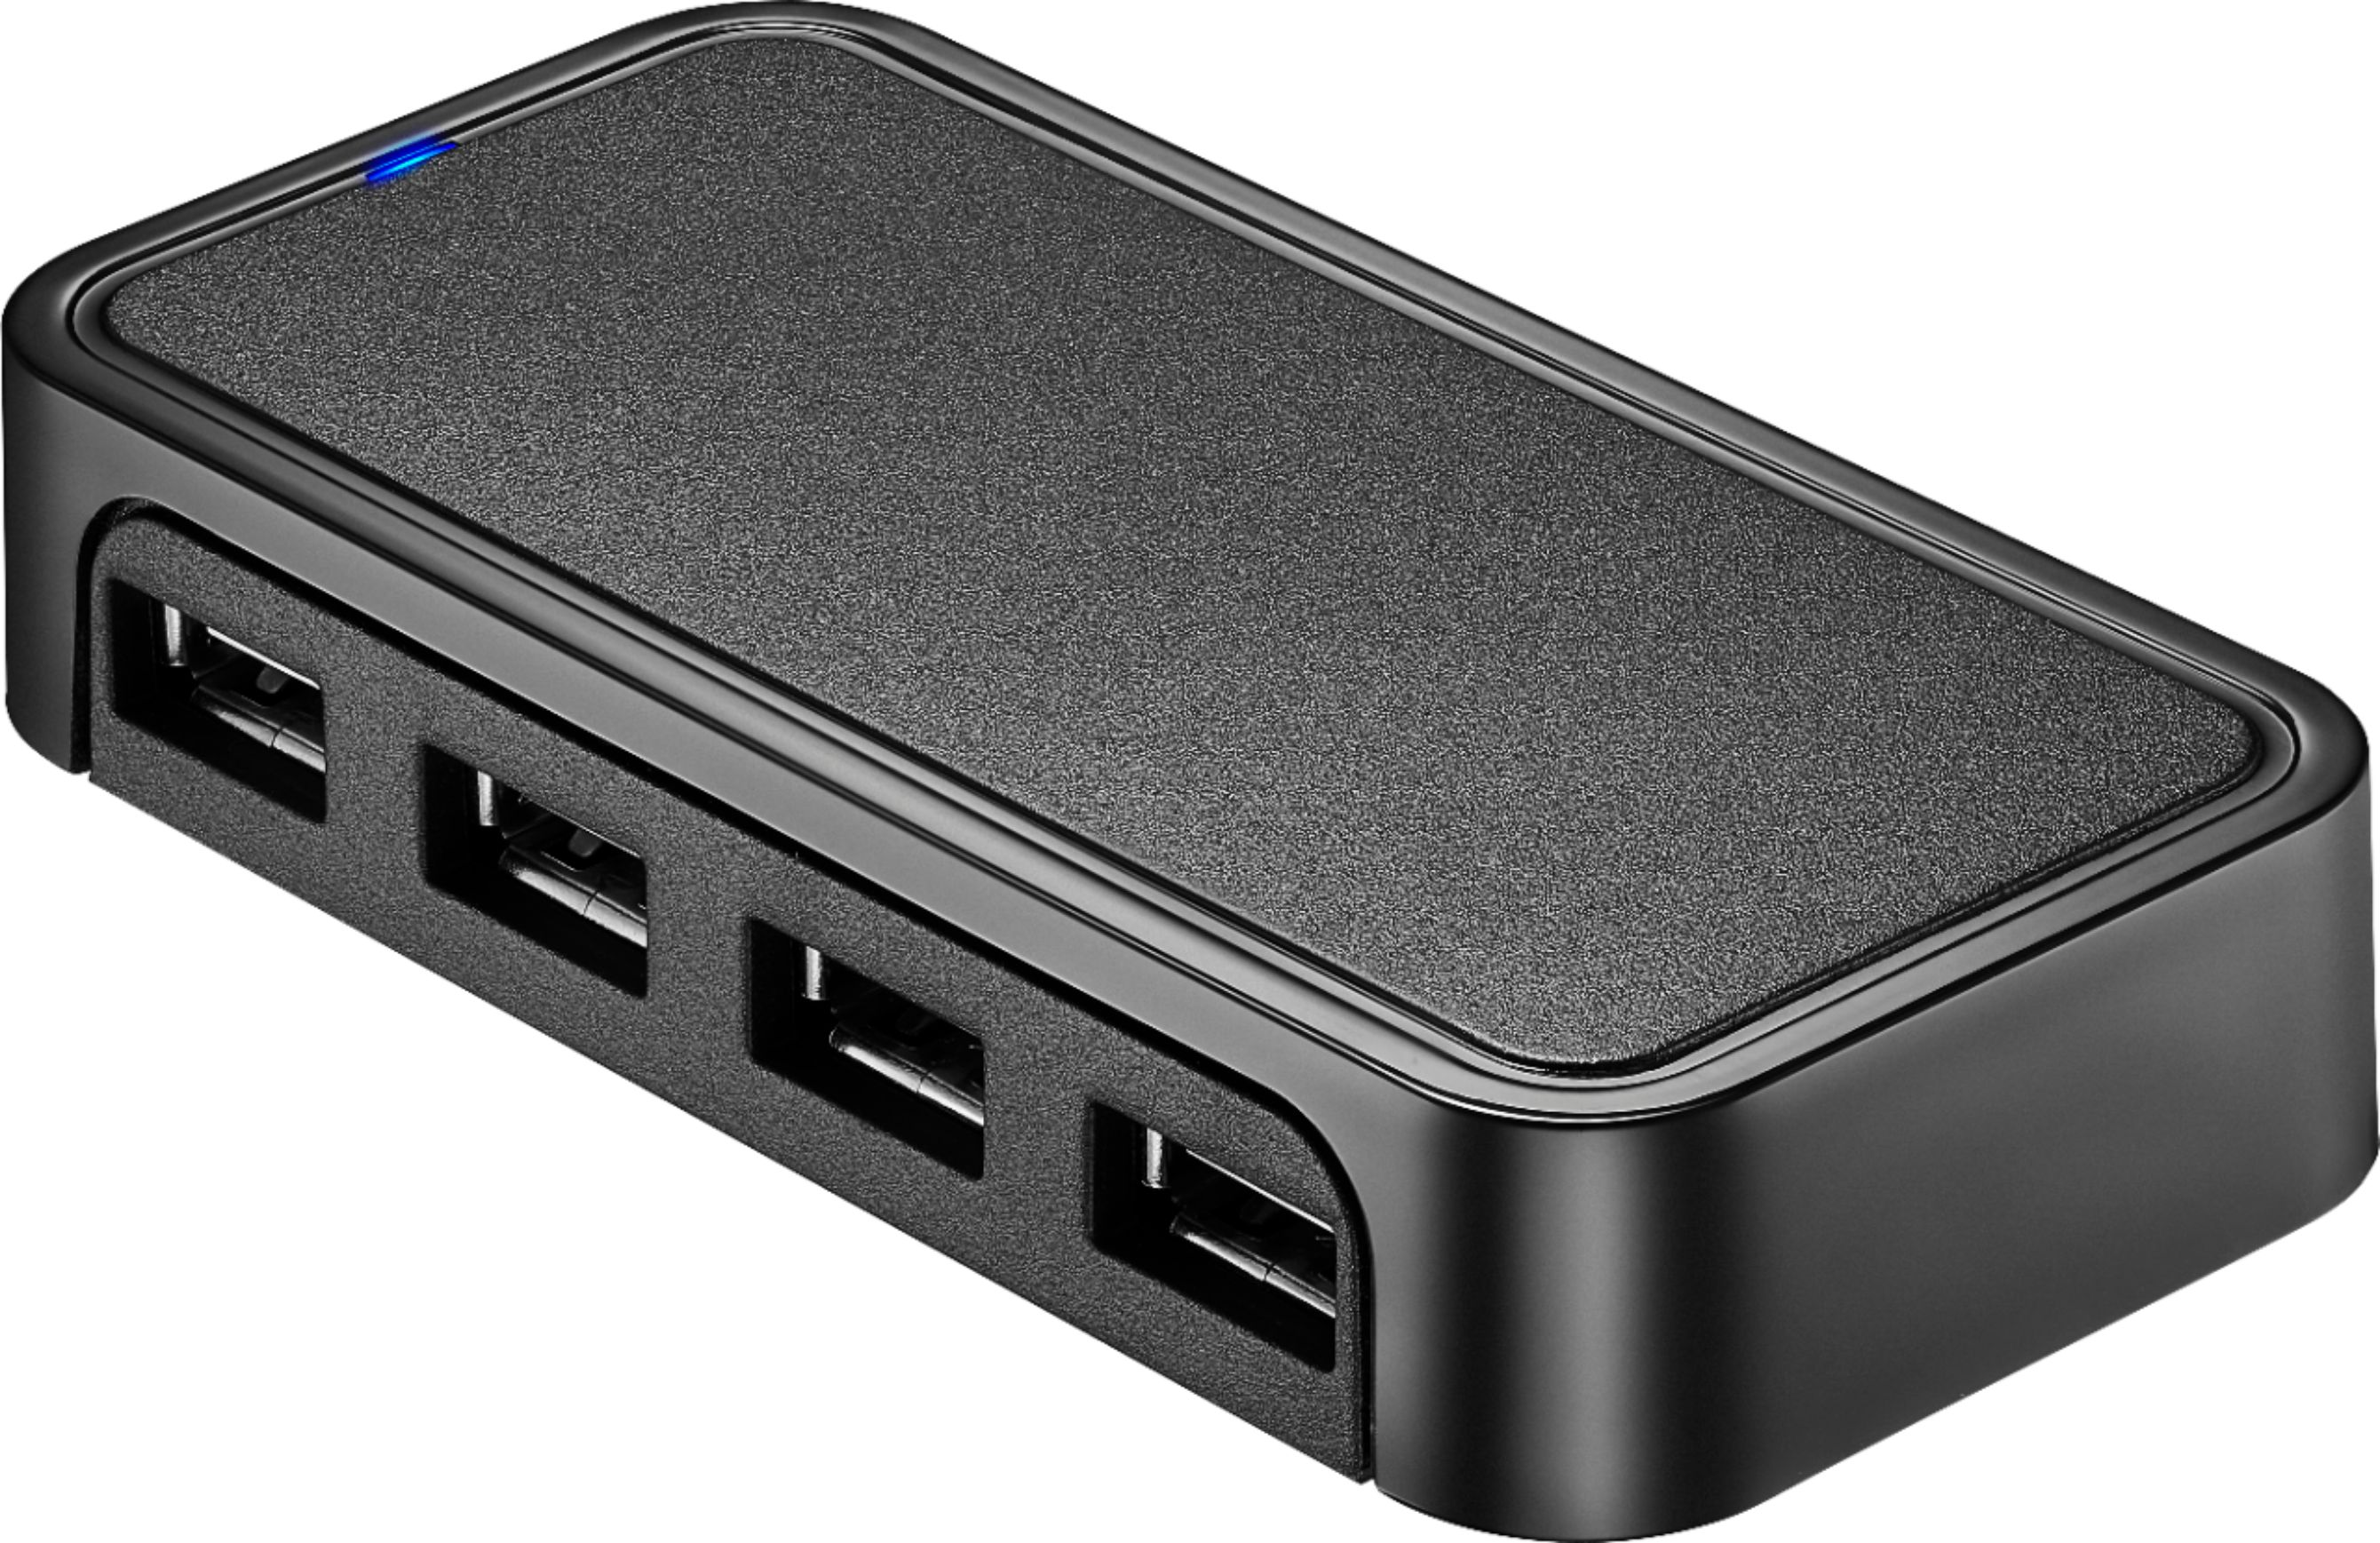 4-Port USB-A Hub with 5V 2A Power Supply, USB Hubs and Cards, USB Cables,  Adapters, and Hubs